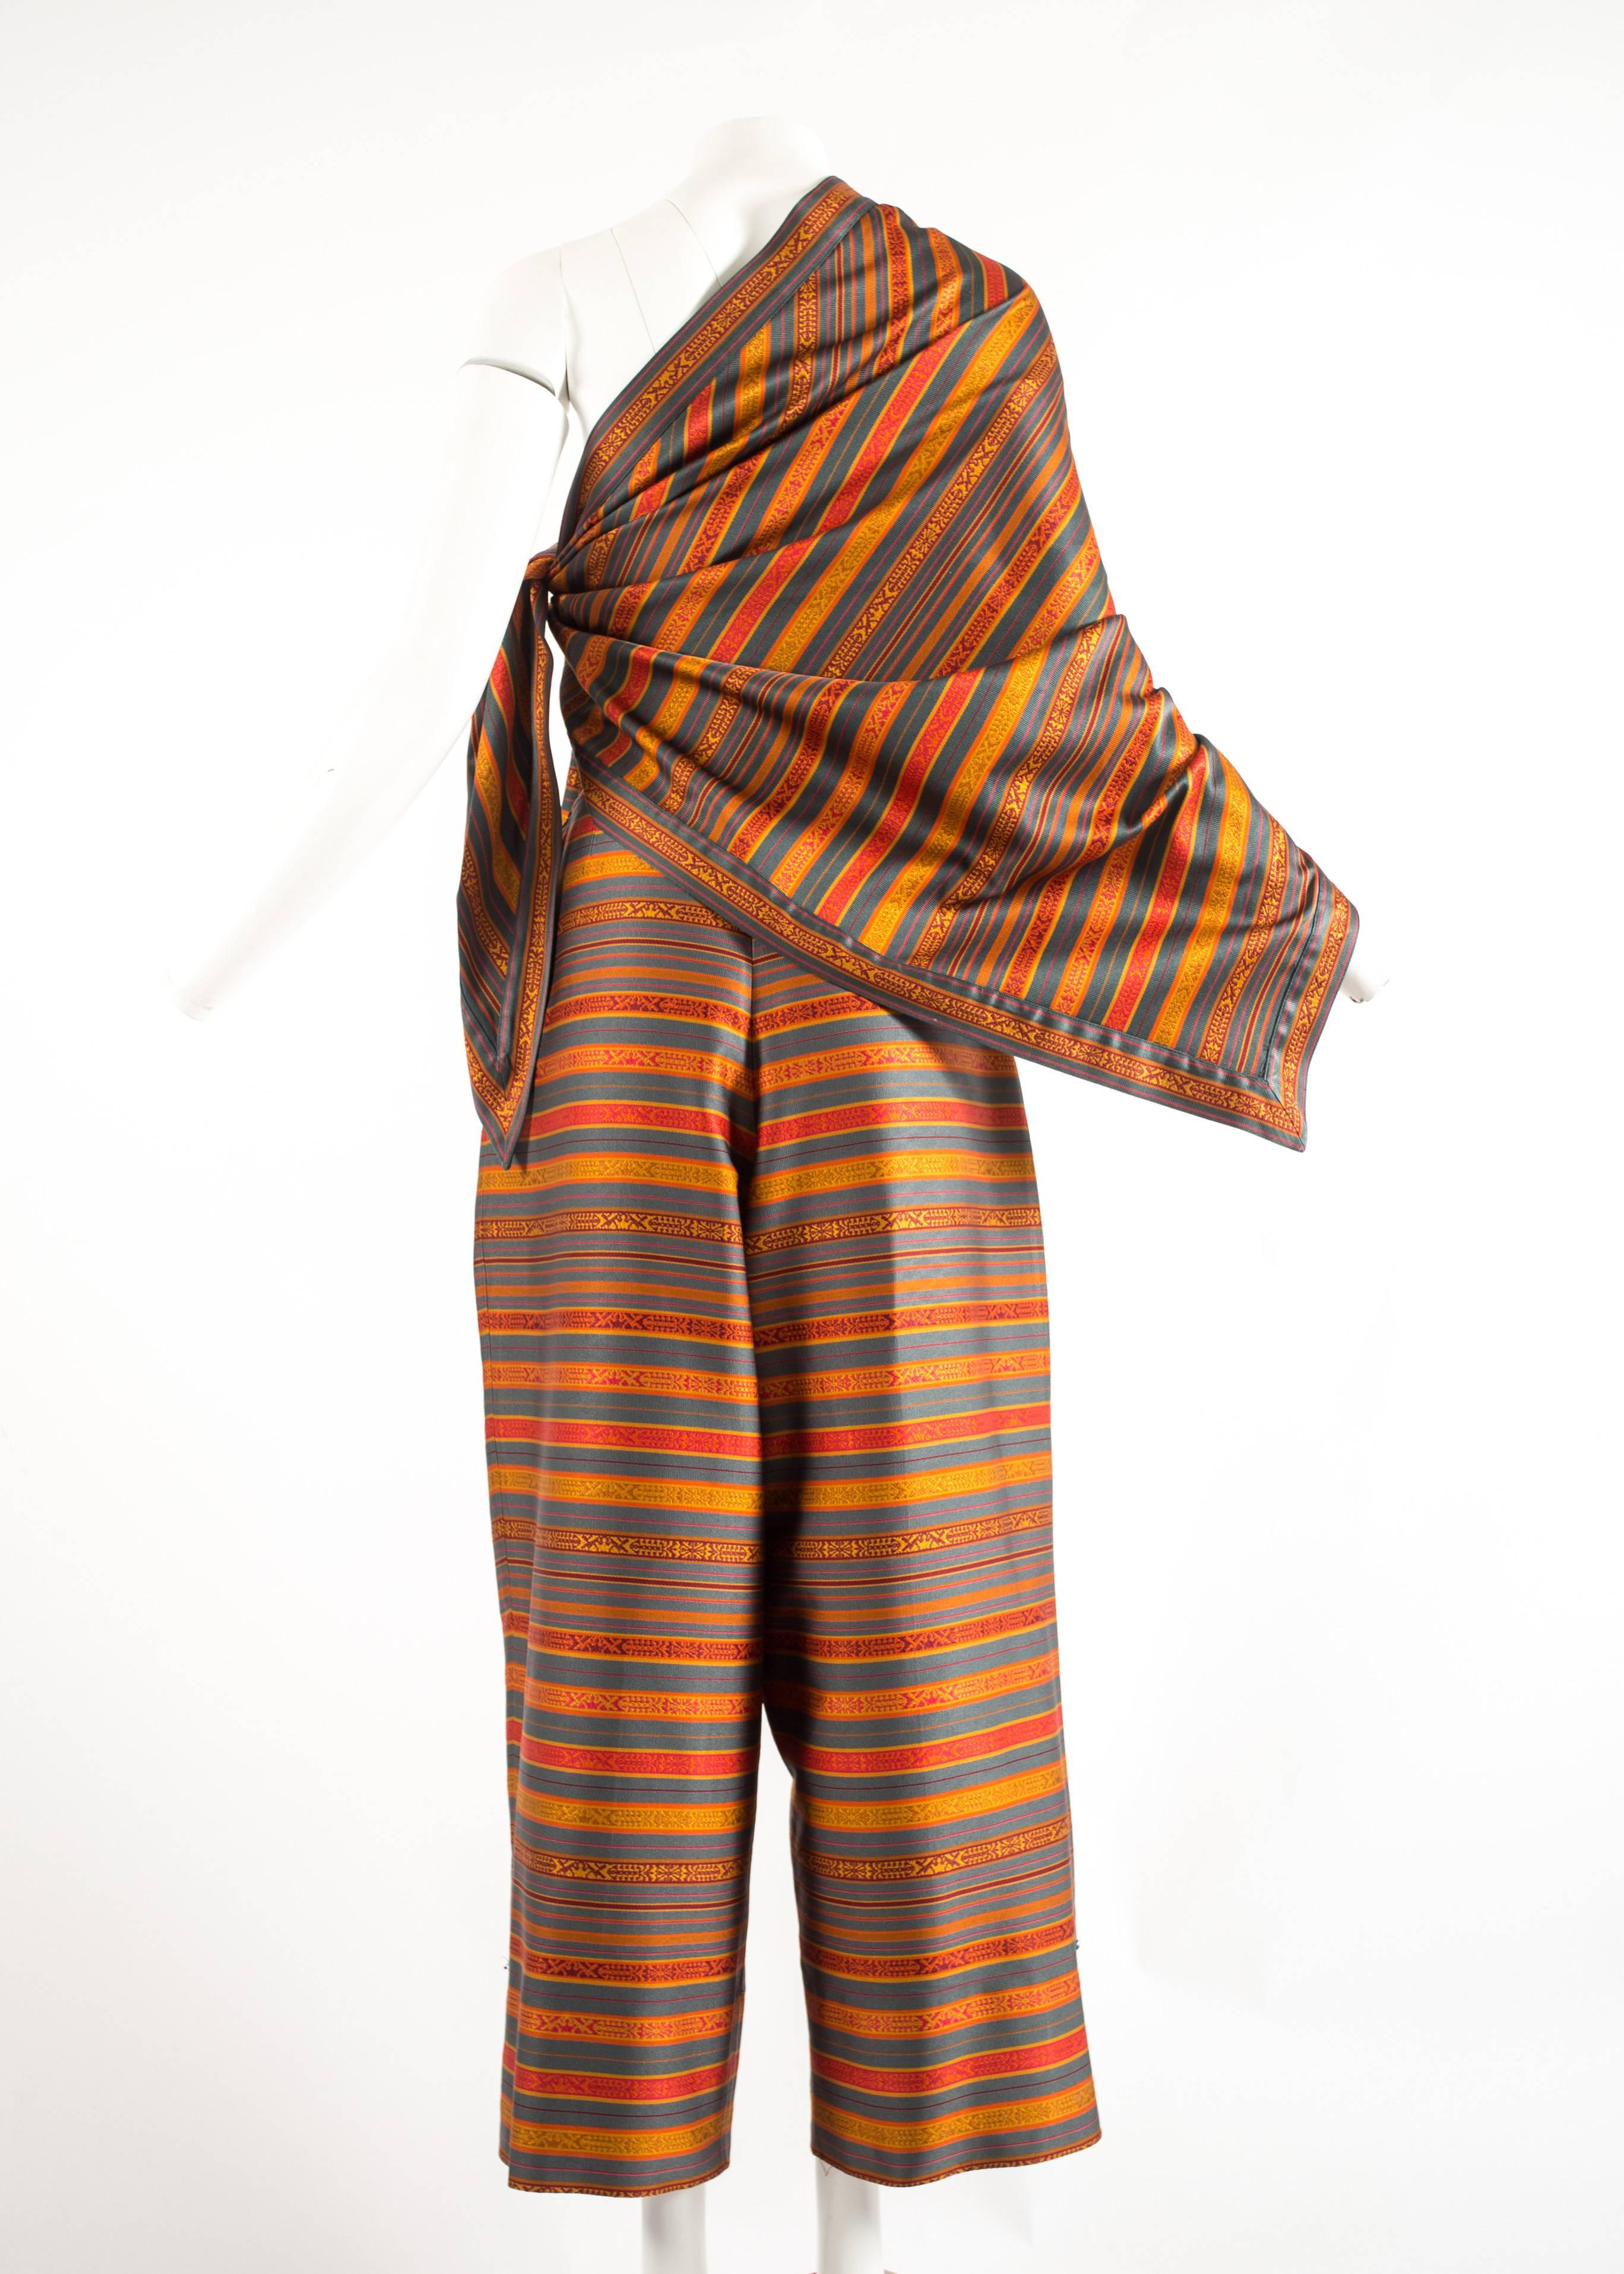 Romeo Gigli for Callaghan Spring-Summer 1991 silk pant and shawl ensemble In Excellent Condition For Sale In London, GB